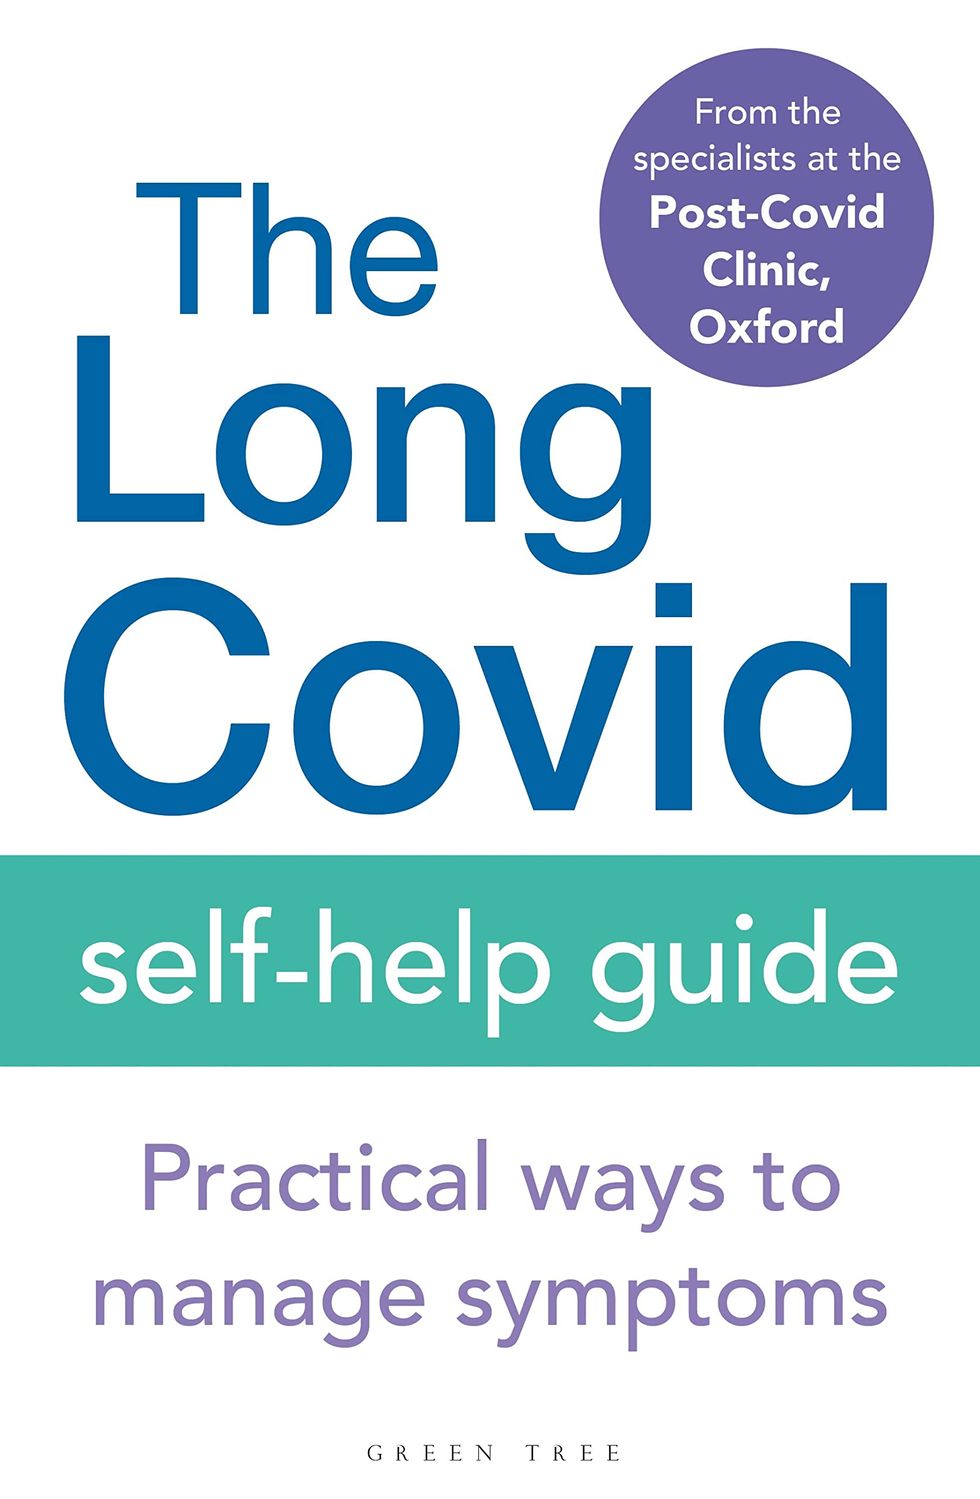 The Long Covid Self-Help Guide